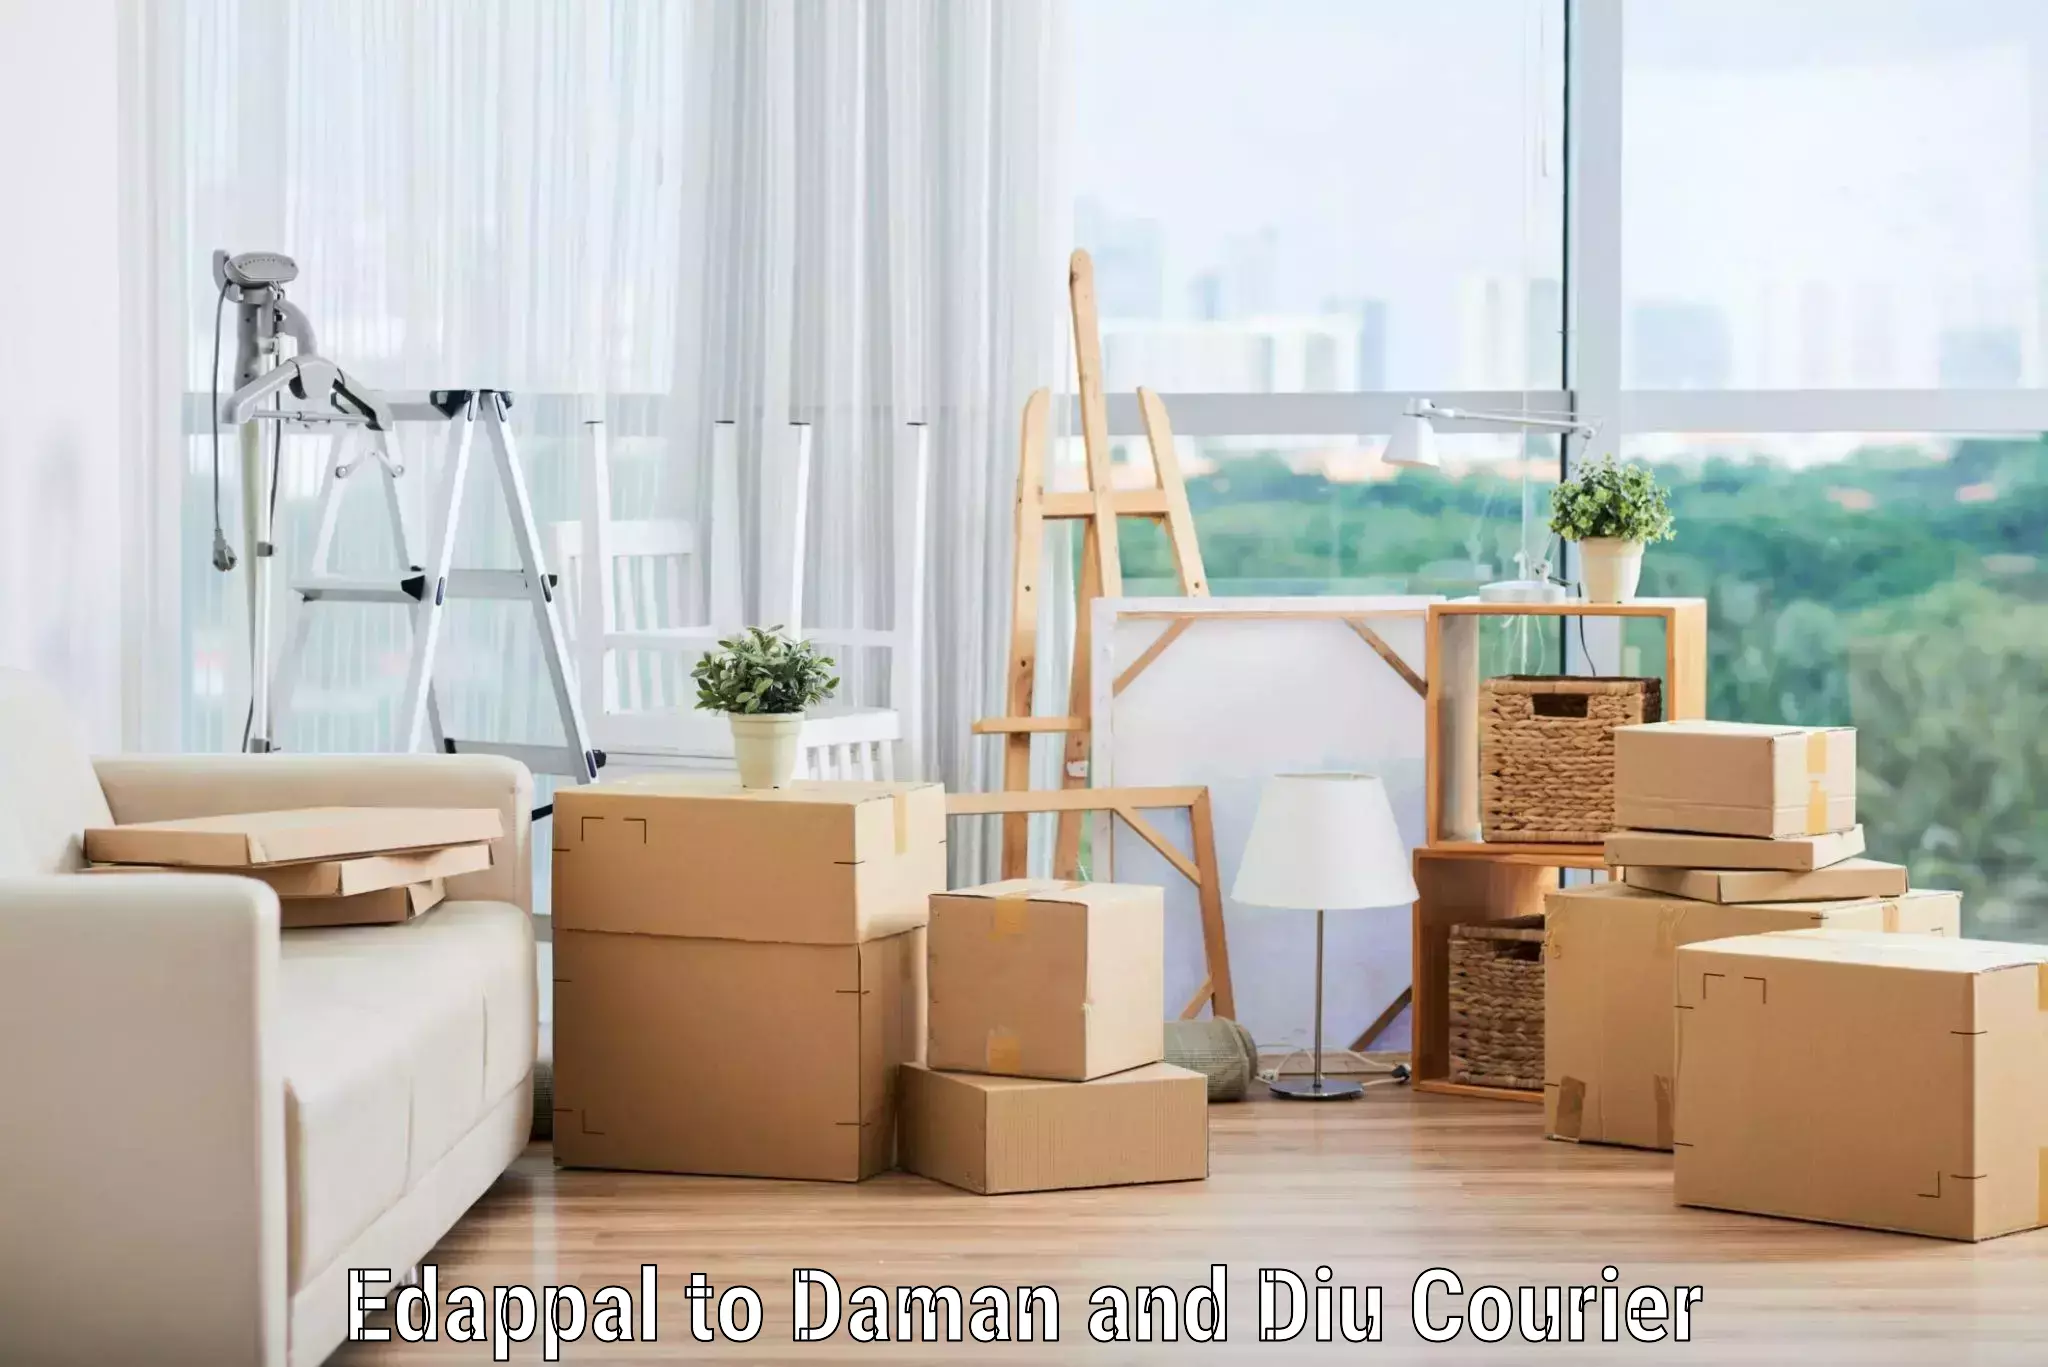 Professional movers and packers Edappal to Daman and Diu